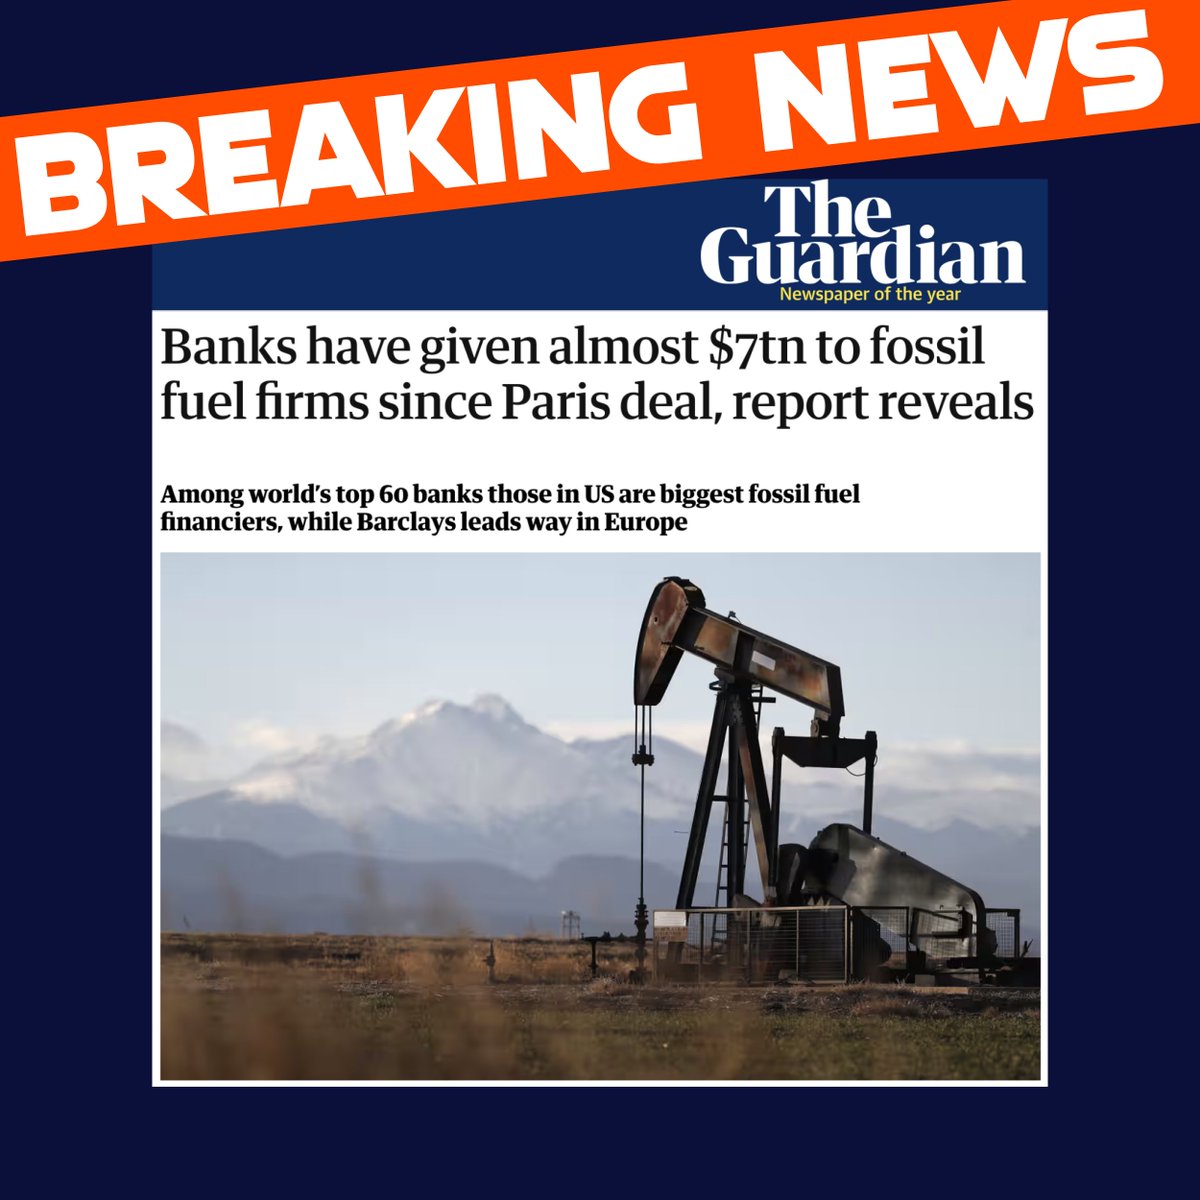 And the big 5 UK banks financed over $550bn of it 😡​

@BarclaysUK, @HSBC_UK, @santanderuk, @LloydsBank and @NatWest_Help are grossly profiting from the climate crisis by continuing to pump £££ into oil and gas expanders 💰

theguardian.com/environment/ar…